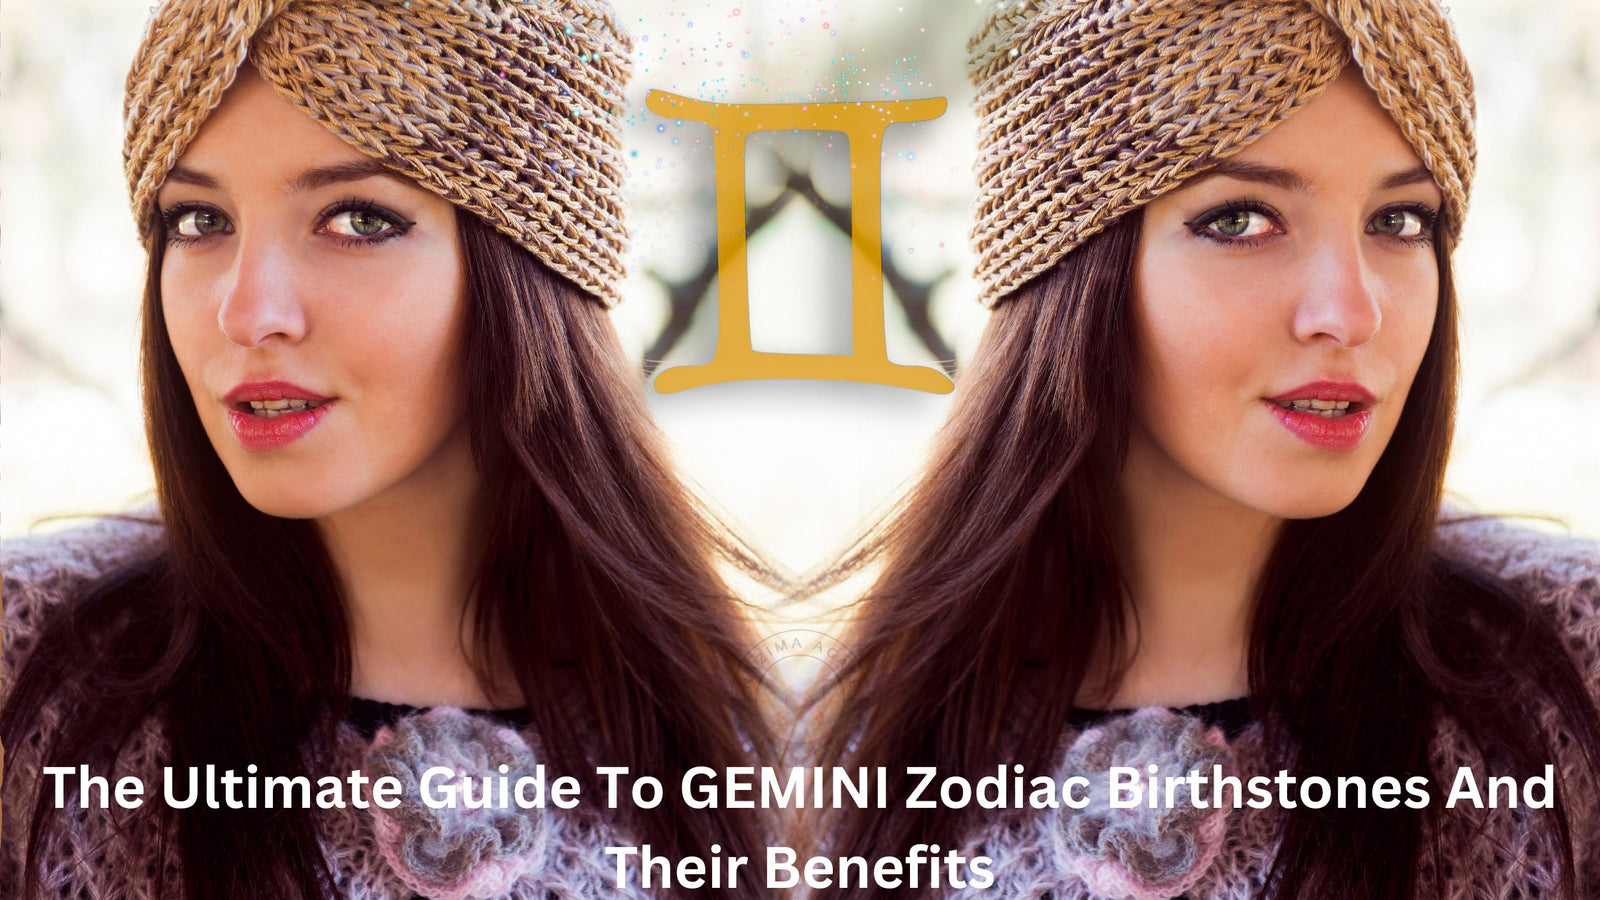 The Ultimate Guide To GEMINI Zodiac Birthstones And Their Benefits